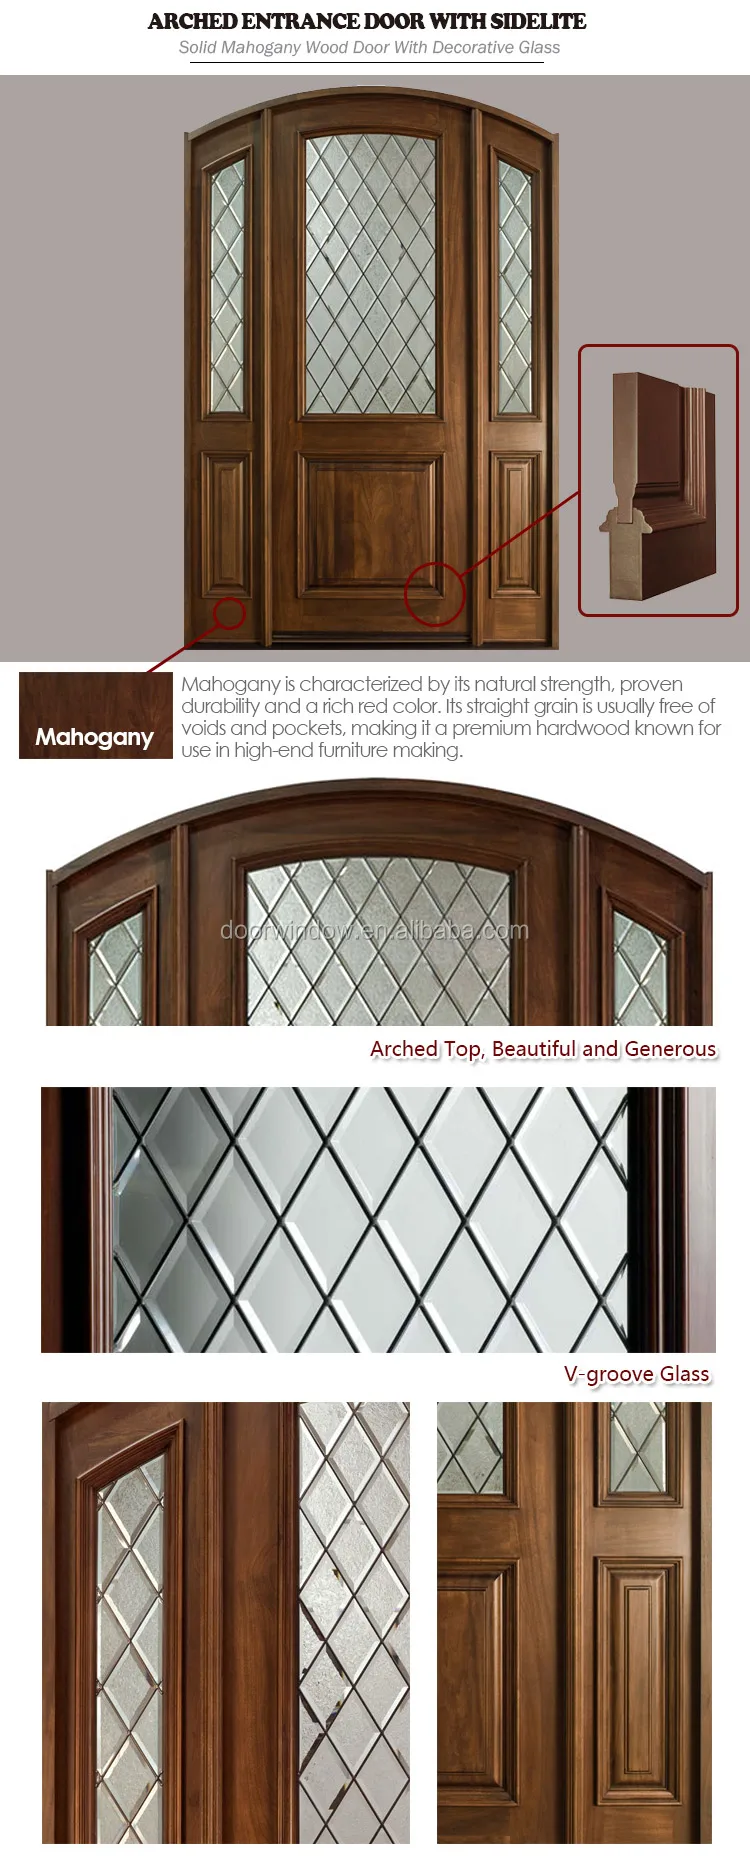 Solid Single Mahogany Wood Interior Wine Cellar Door with Arch Top and Insulated Glass